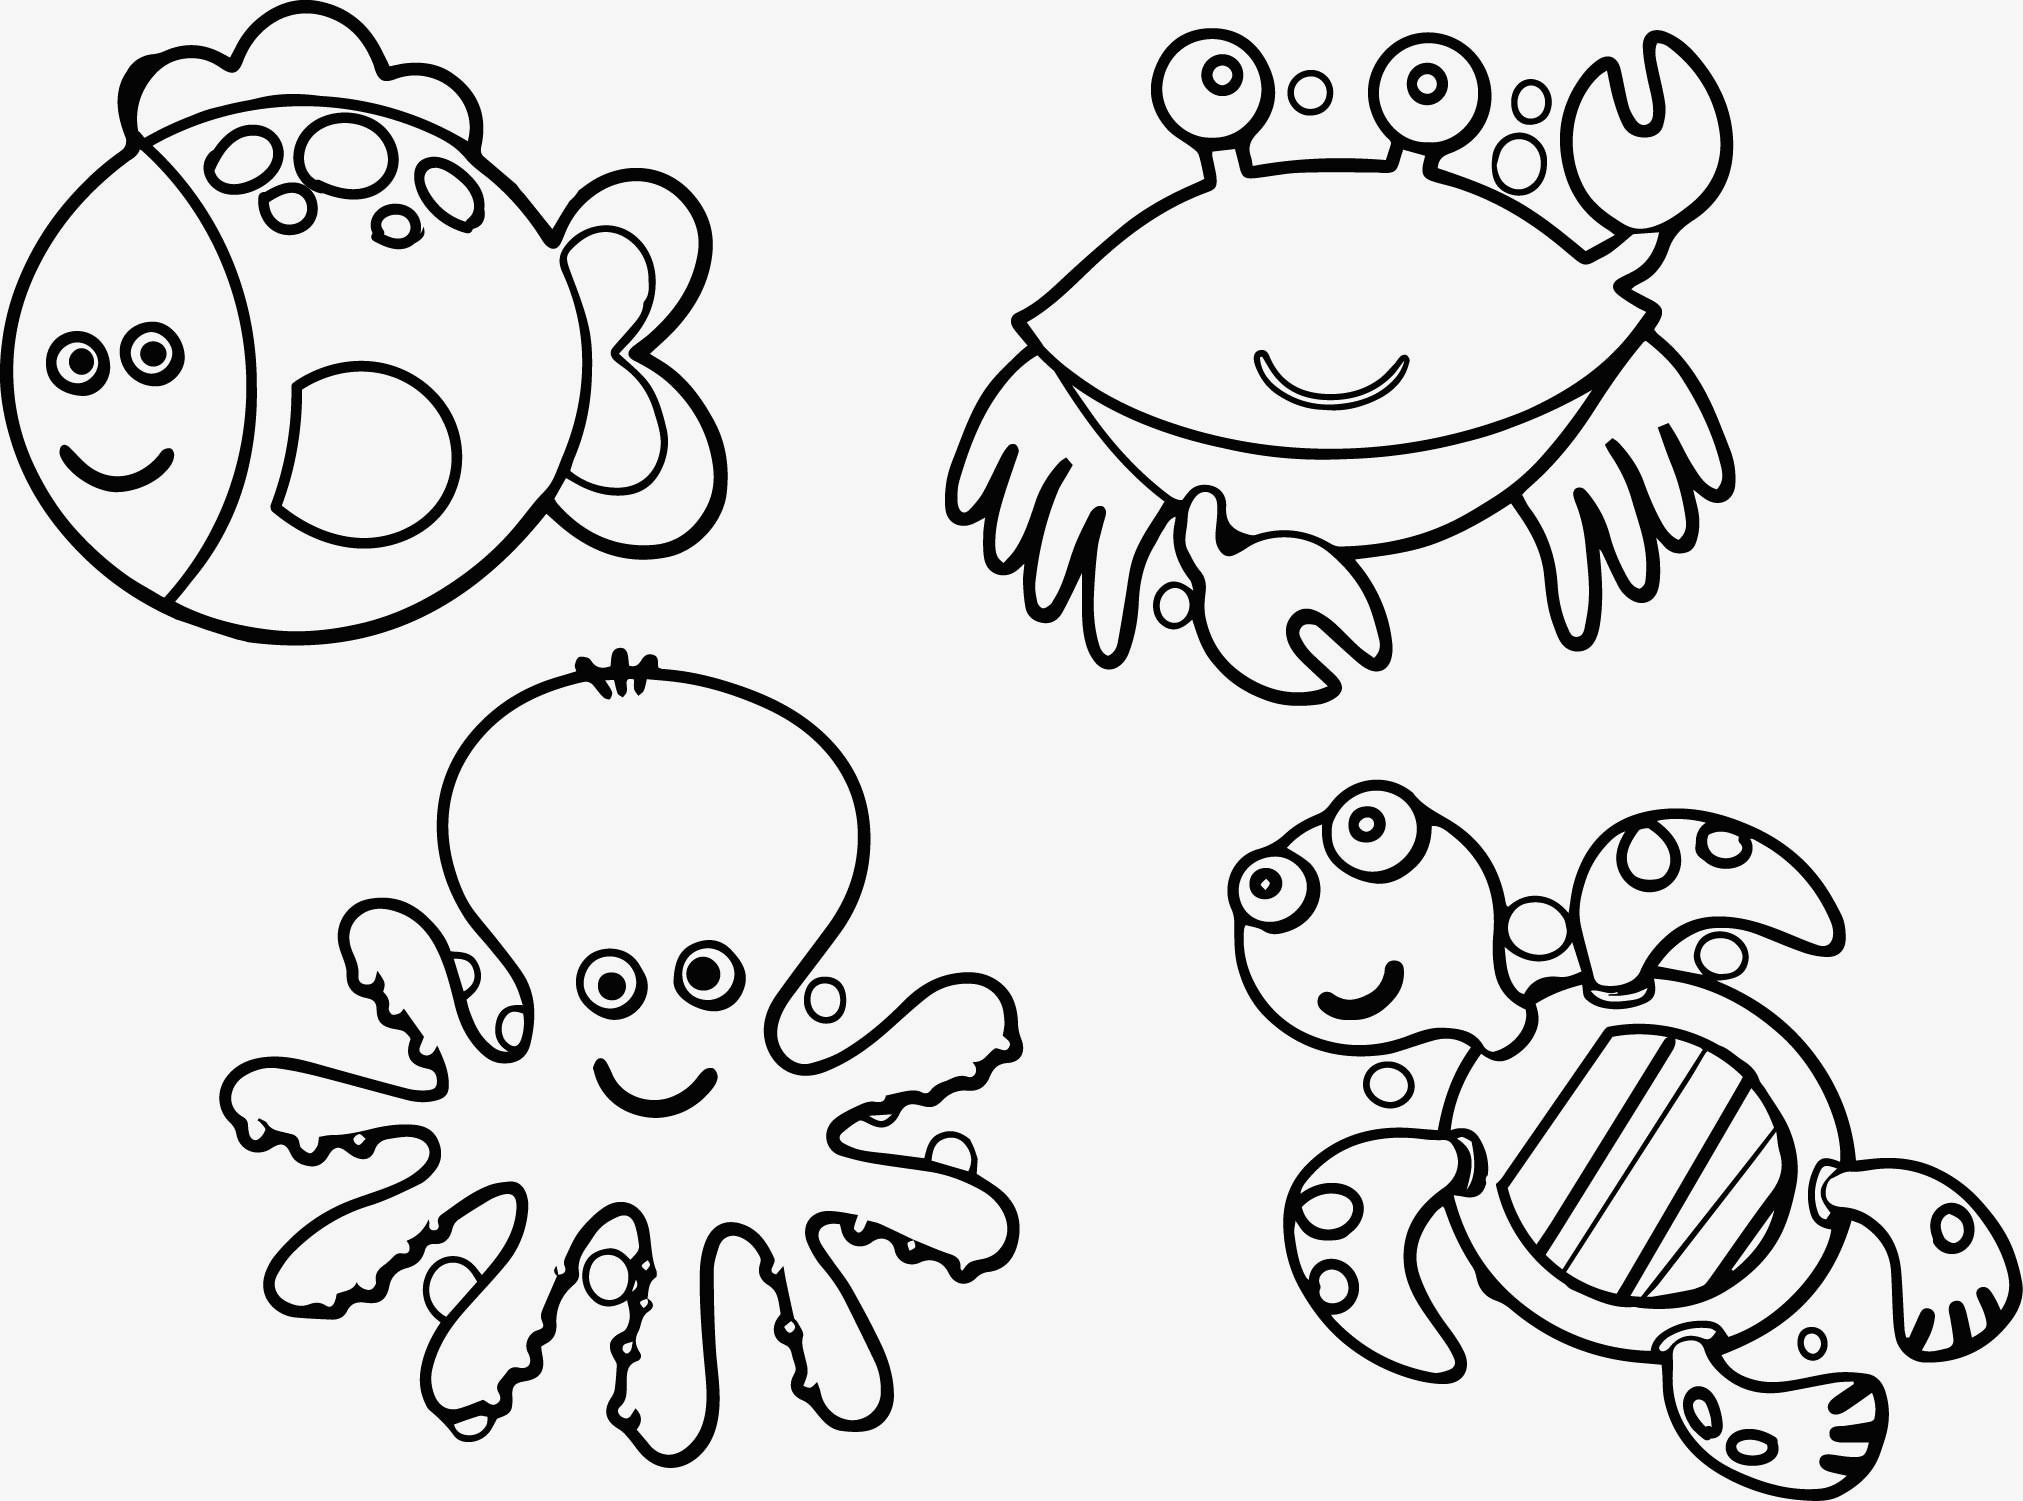 Animal Coloring Pages that are Printable New Sea Animal Coloring Pages Printable Free Inspirational Best Od